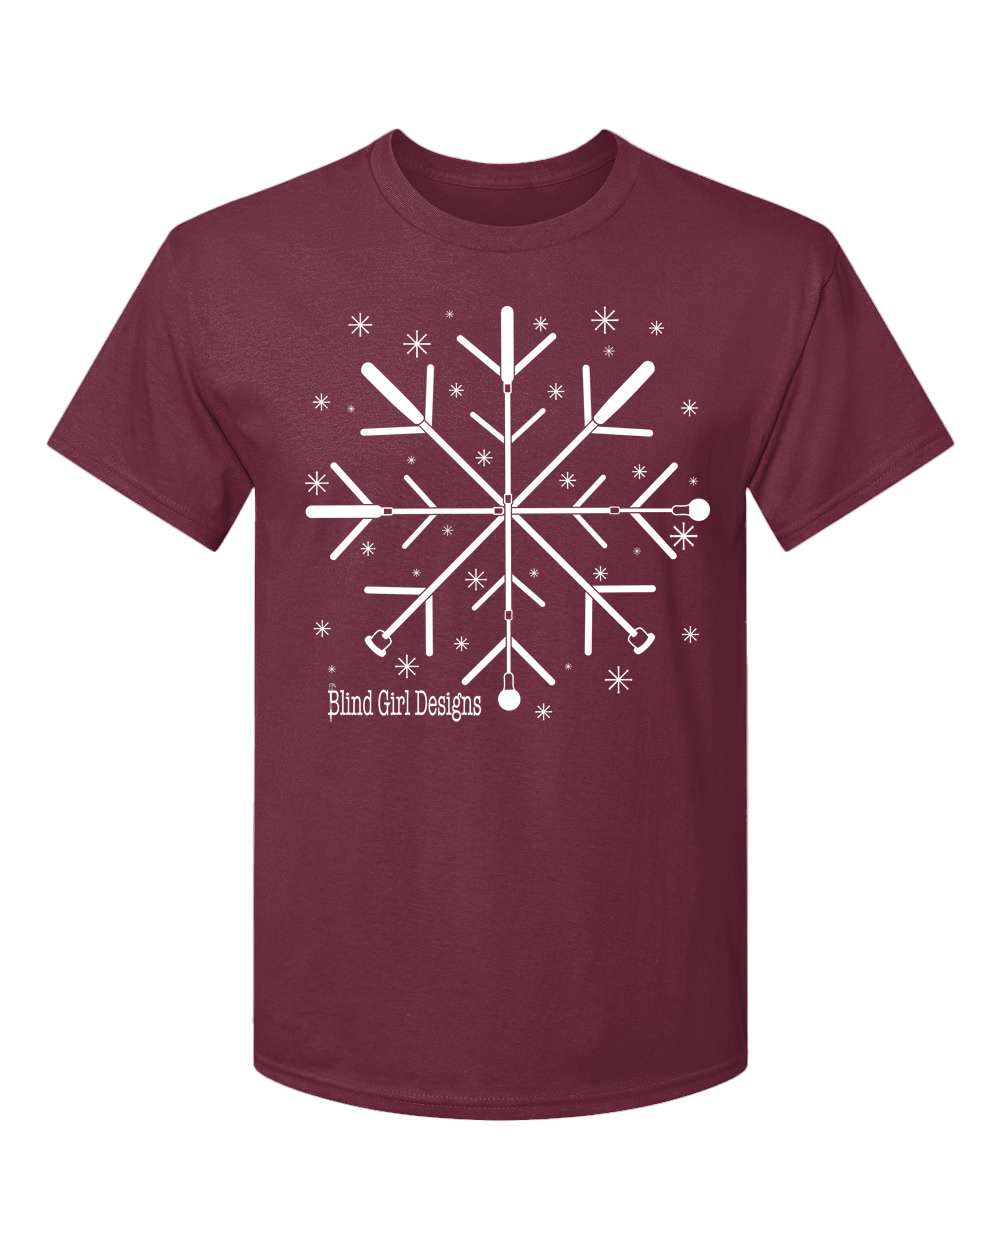 New! 3D Tactile White Cane Snowflake T-Shirt - deep berry